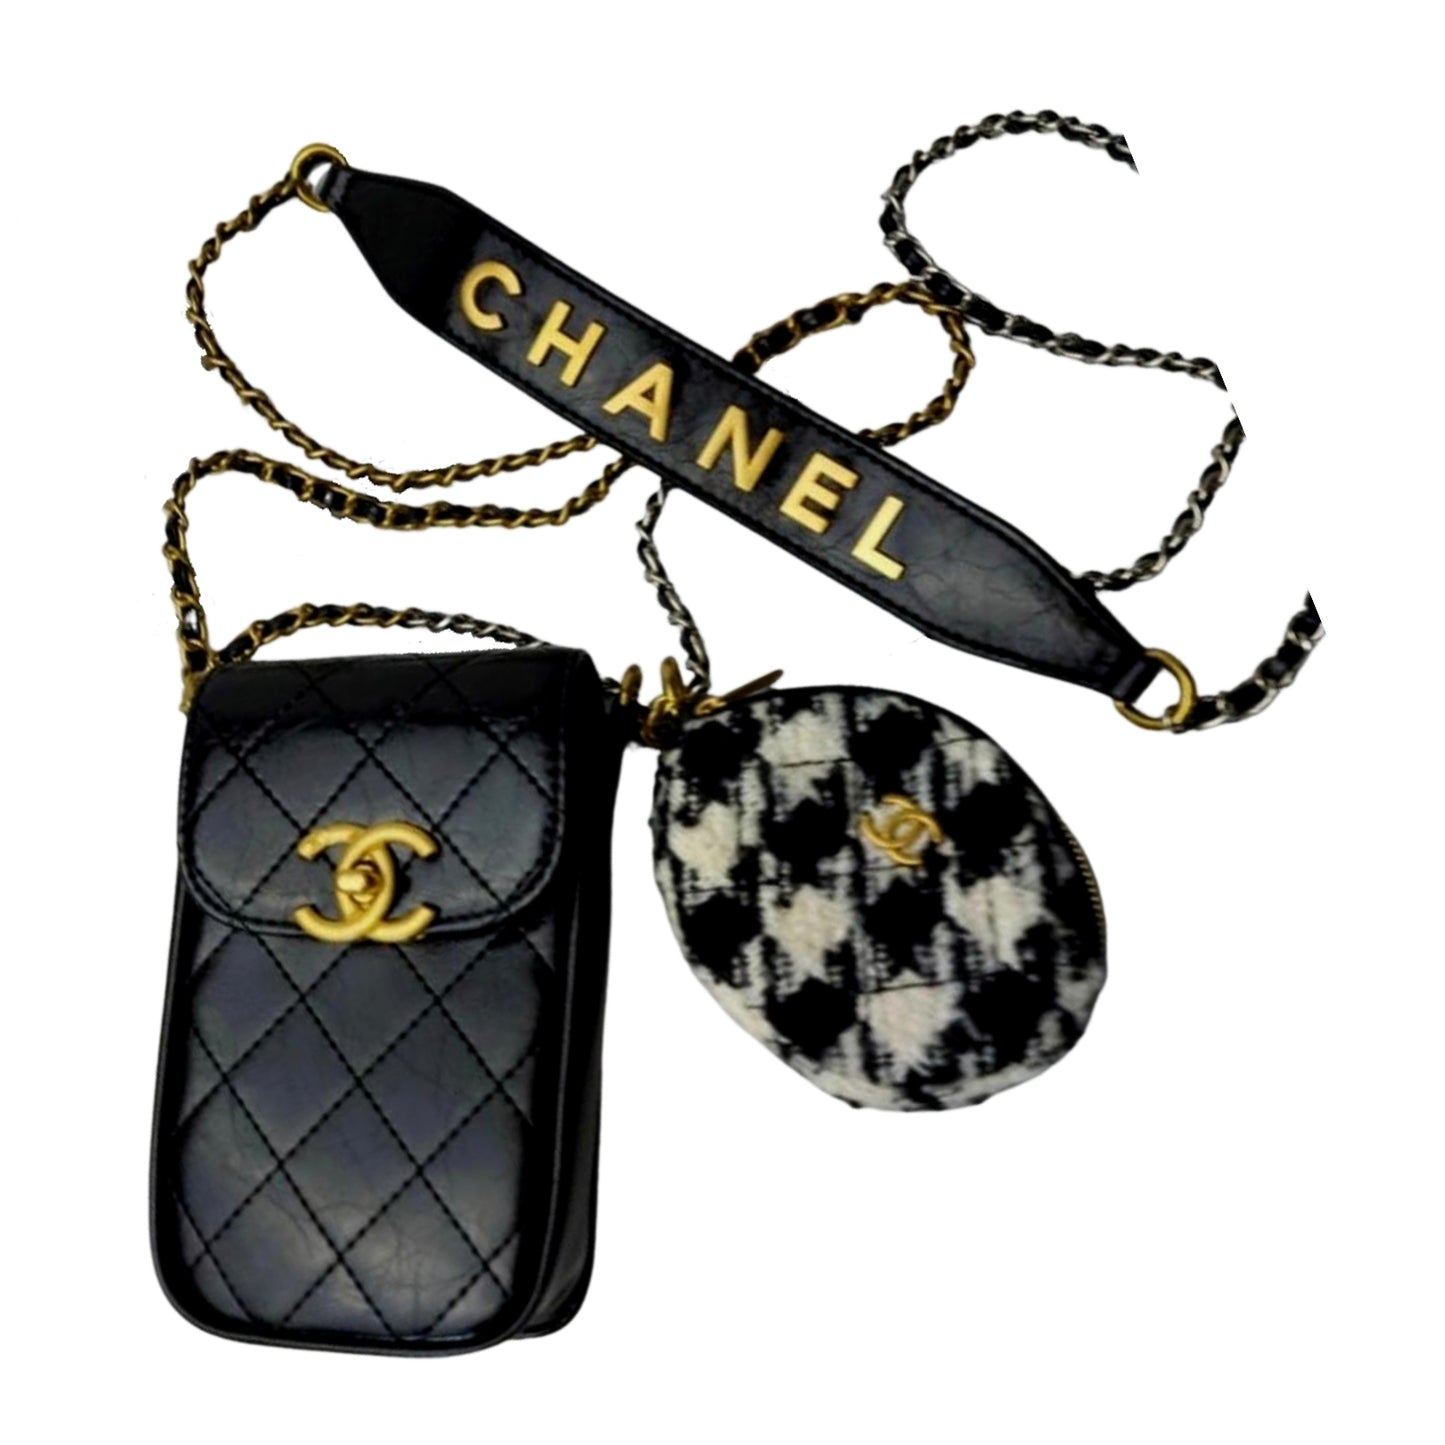 Chanel VIP Gift Multi pochette pouch  Chanel coin purse, Chanel phone case,  Leather projects